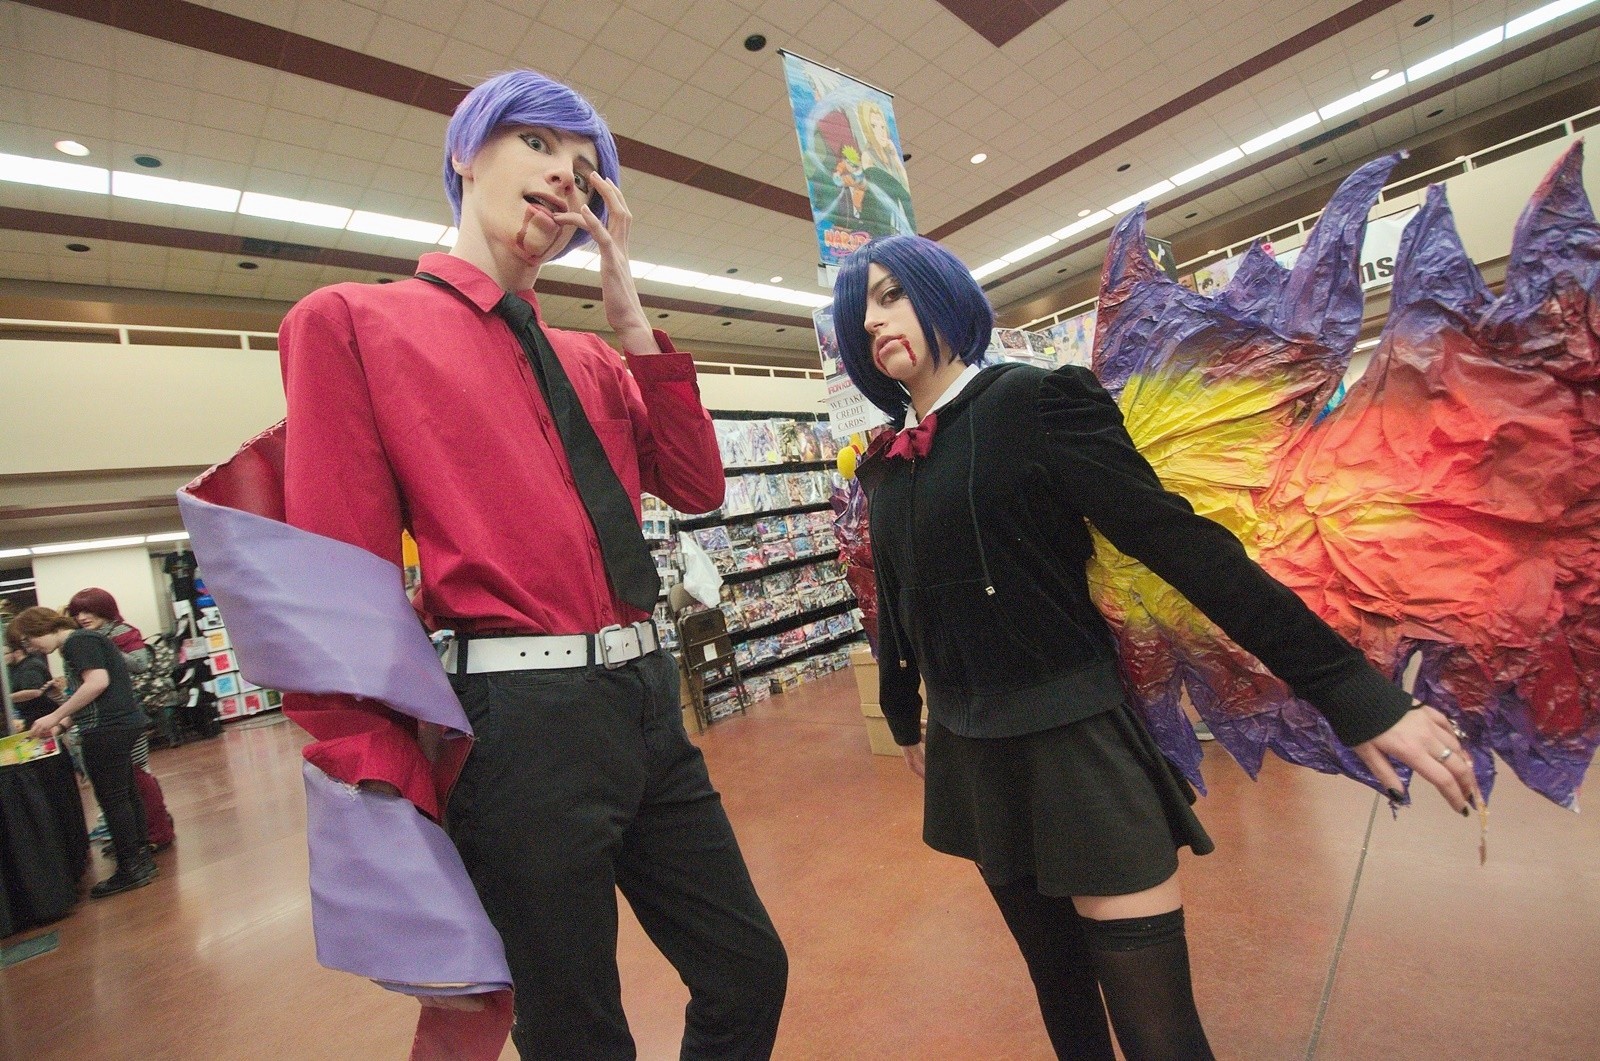 Cosplay industry grows rapidly Arizona benefits from pop culture   Cronkite News